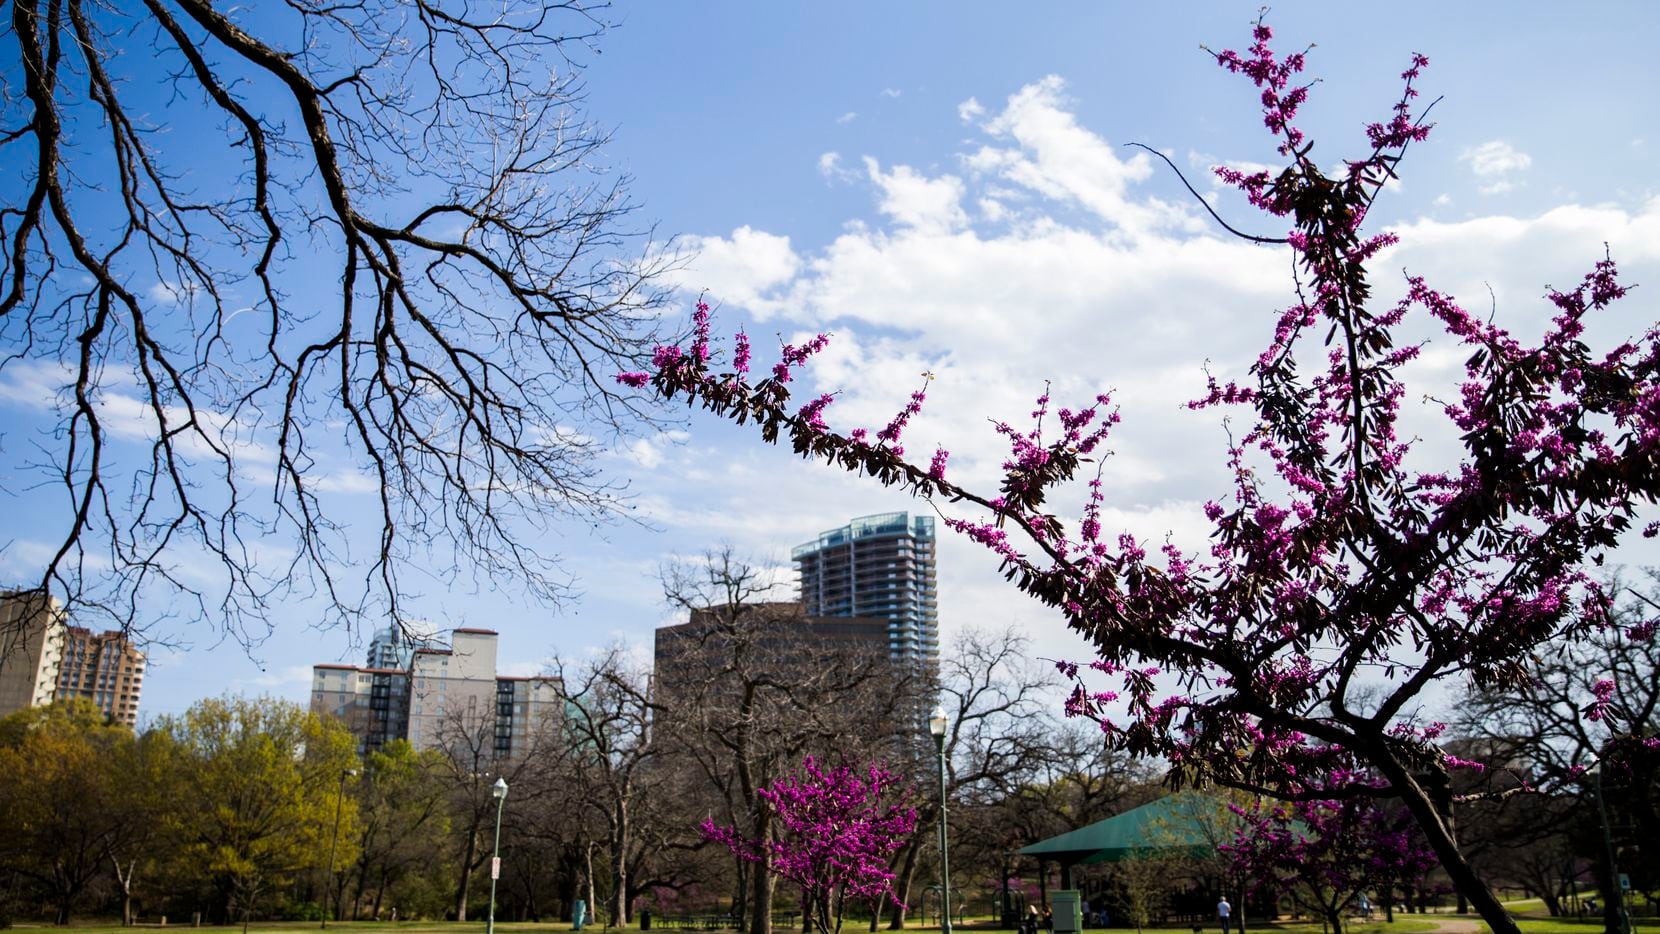 Redbud trees burst with sping color on Sunday, March 18, 2018 at Reverchon Park in Dallas....